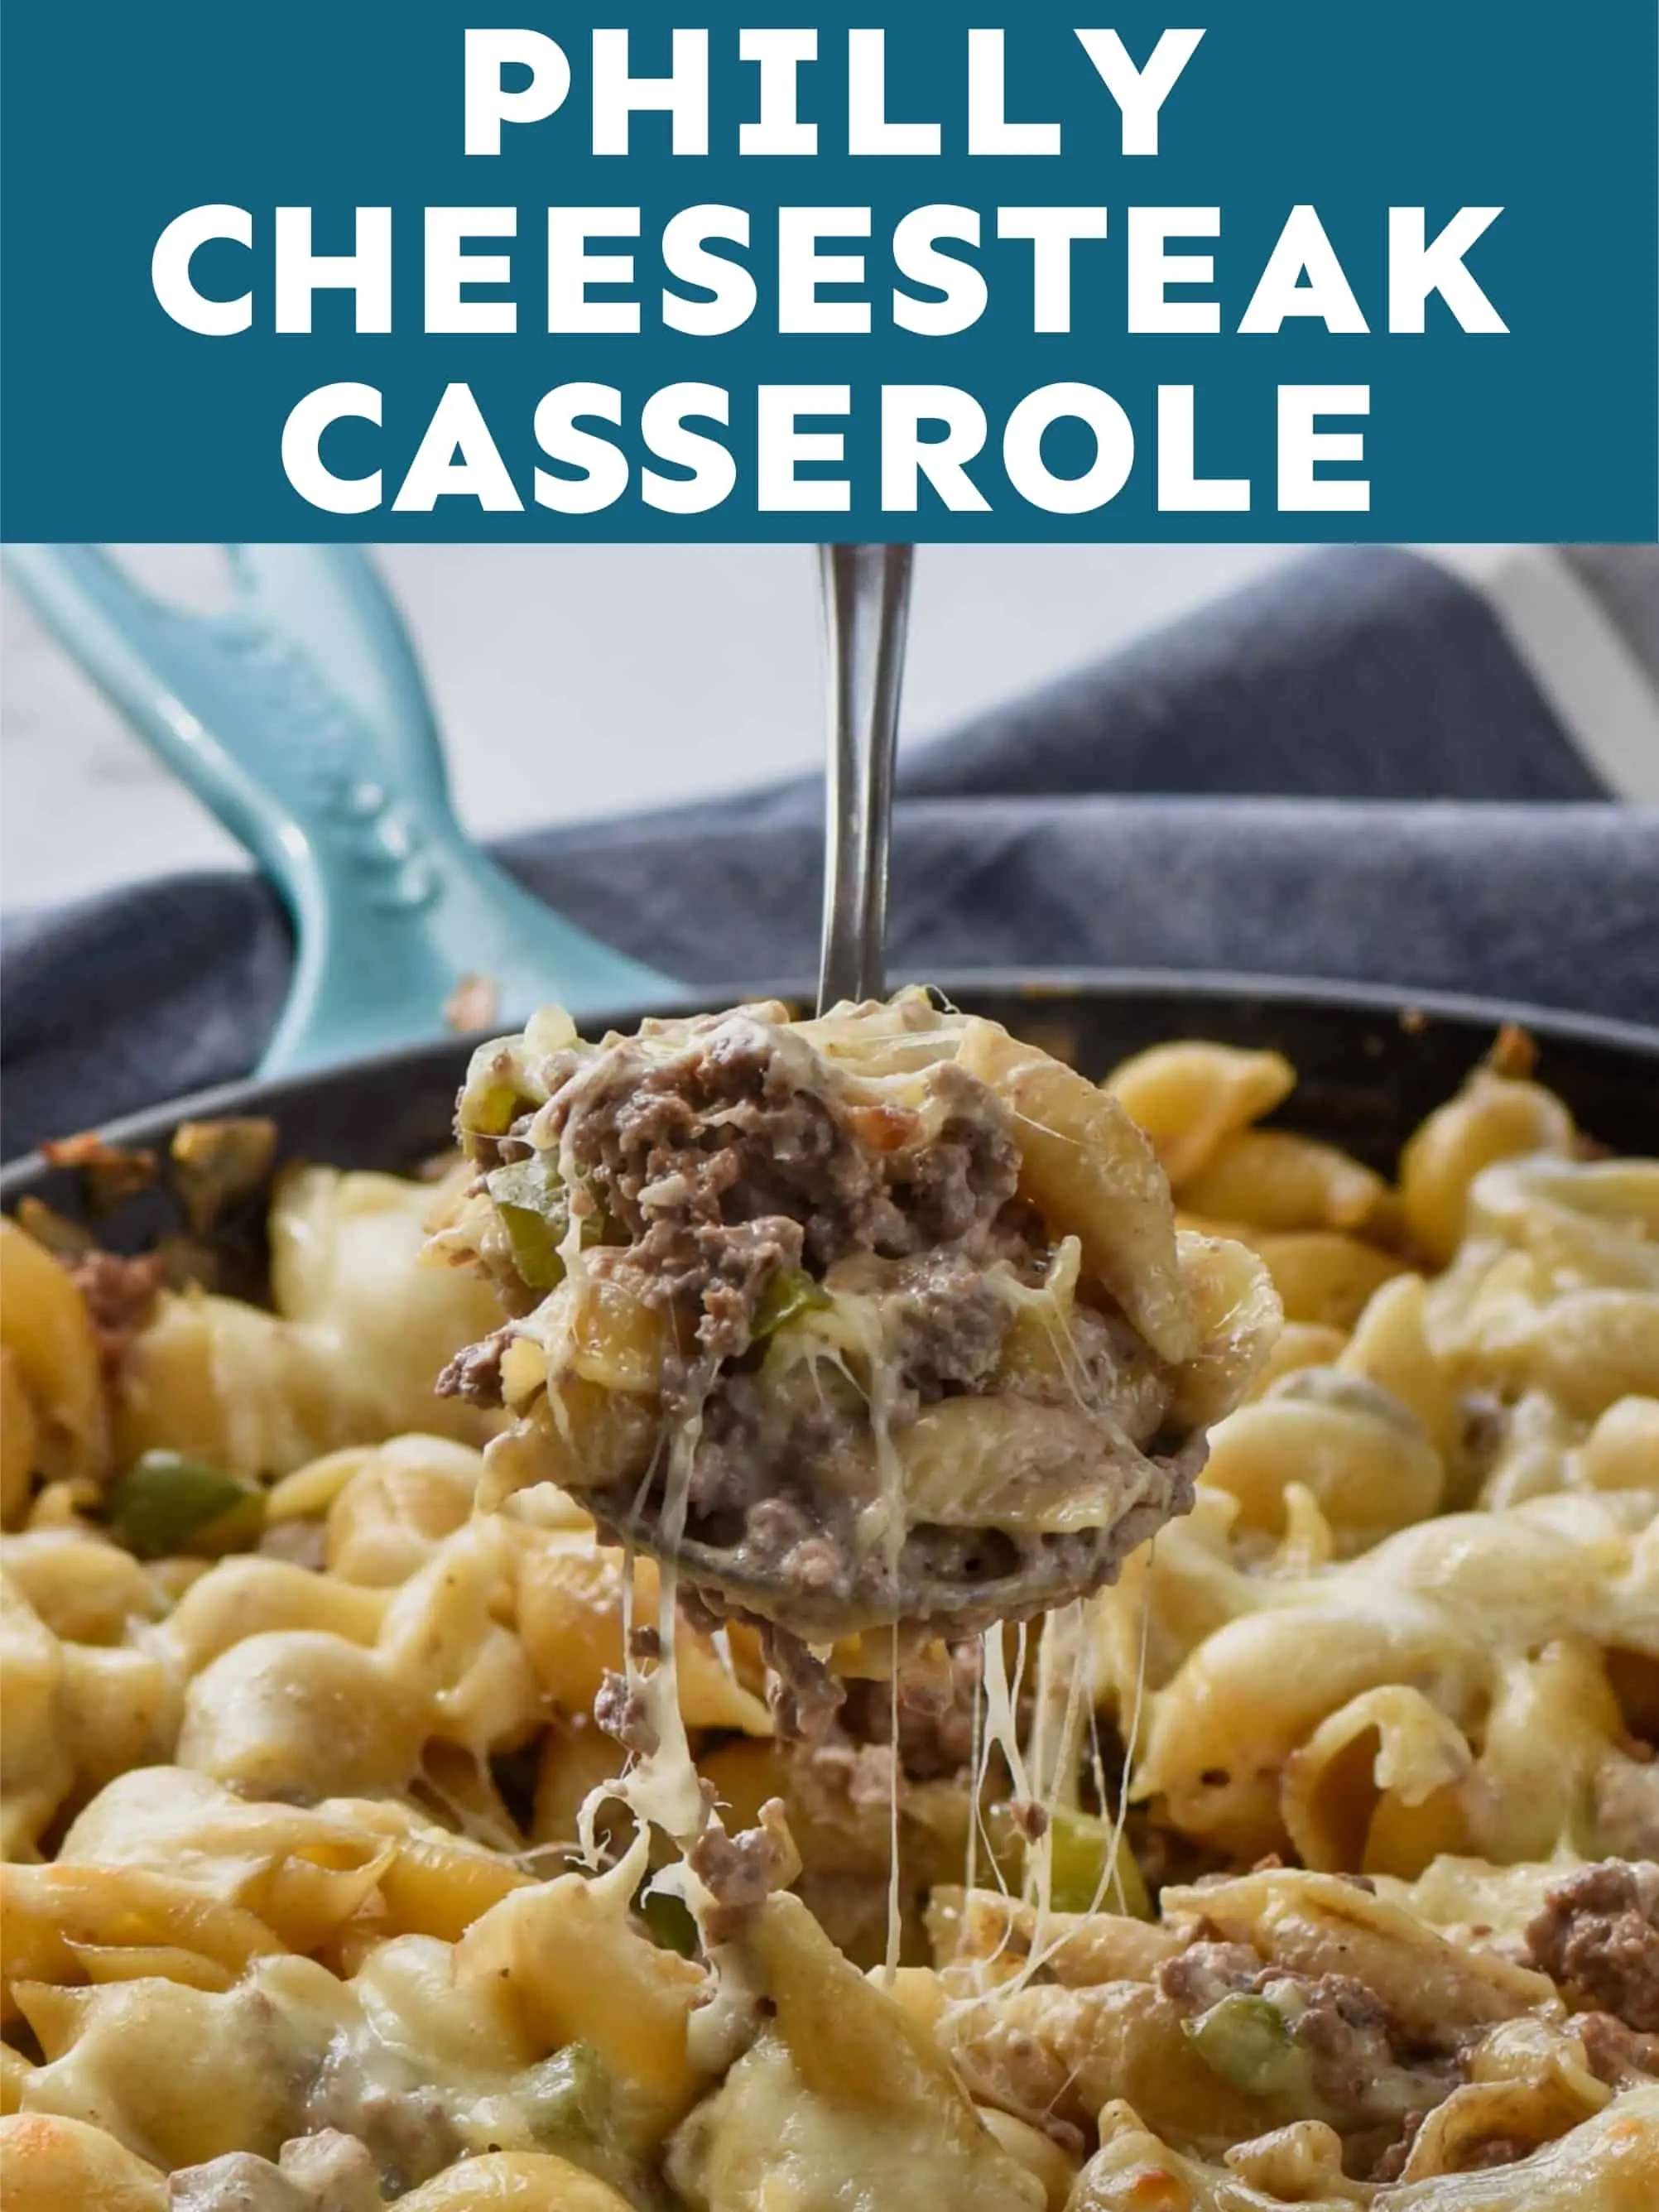 web story graphic of Philly cheesesteak casserole